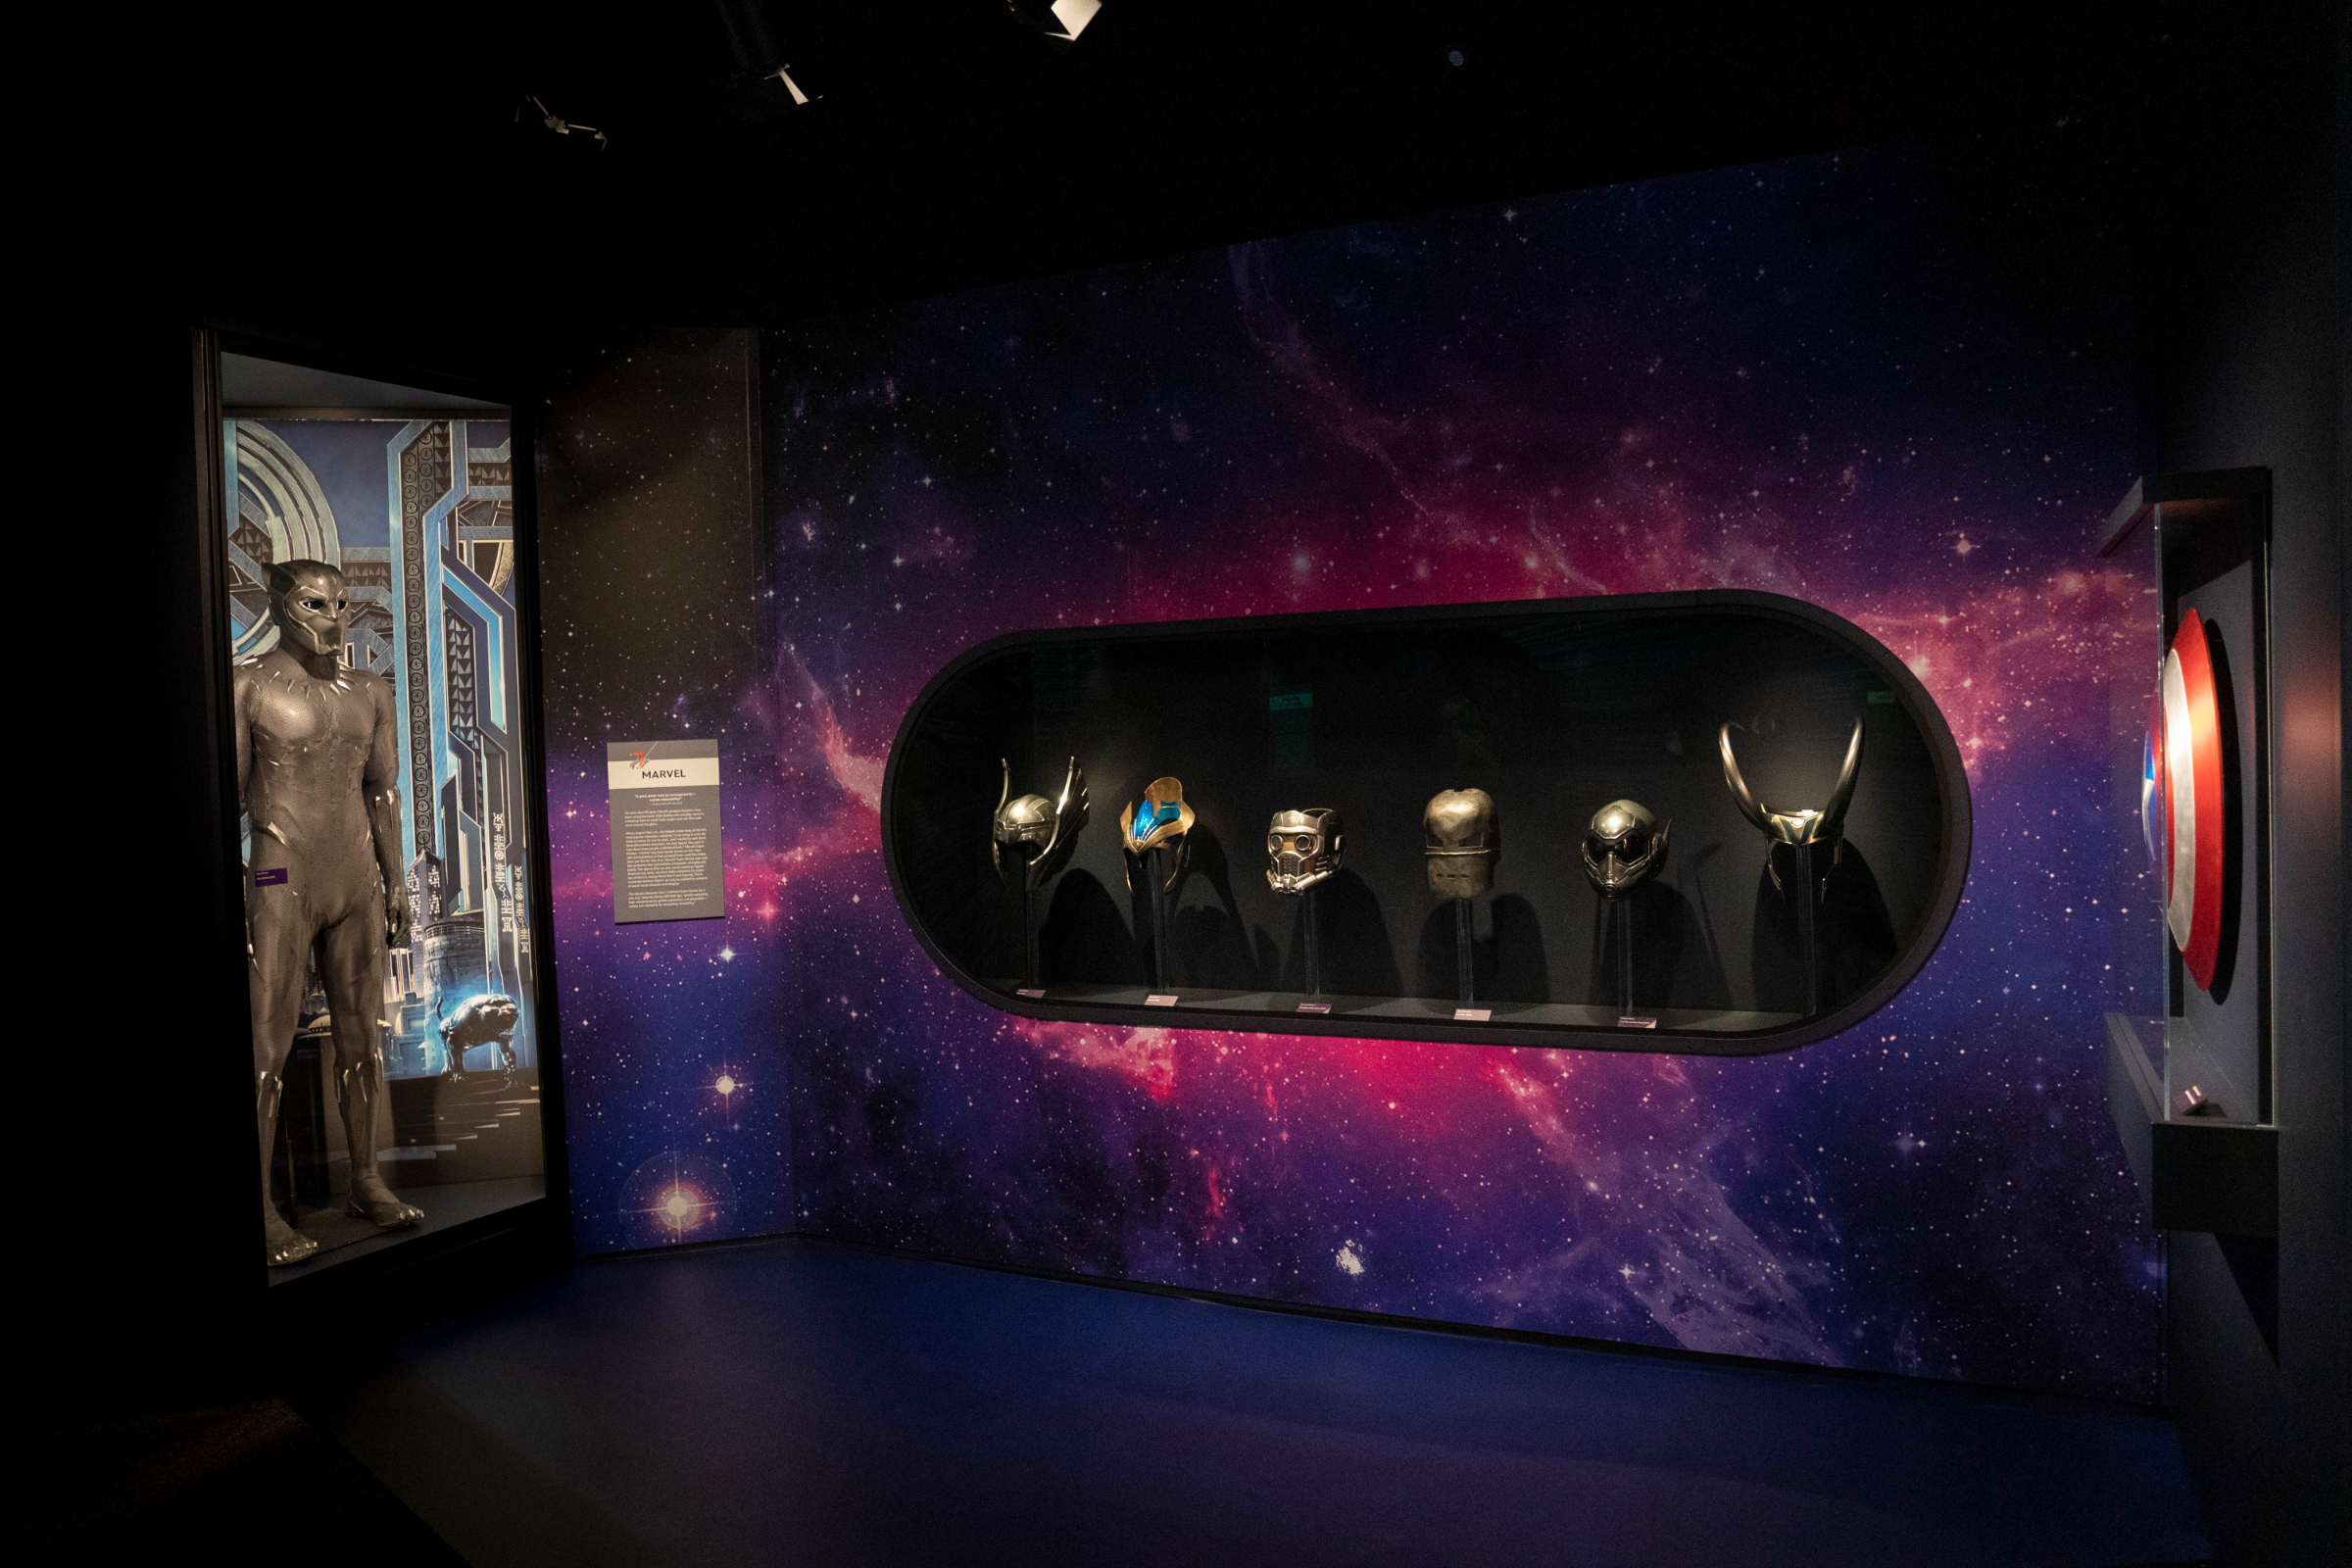 Black Panther costume (Black Panther, 2018), Marvel Studios character helmets and masks, and Captain America shield (Captain America: Civil War, 2016) featured inside The Spirit of Adventure and Discovery gallery at Disney100: The Exhibition, now open at The Franklin Institute in Philadelphia. ©MARVEL